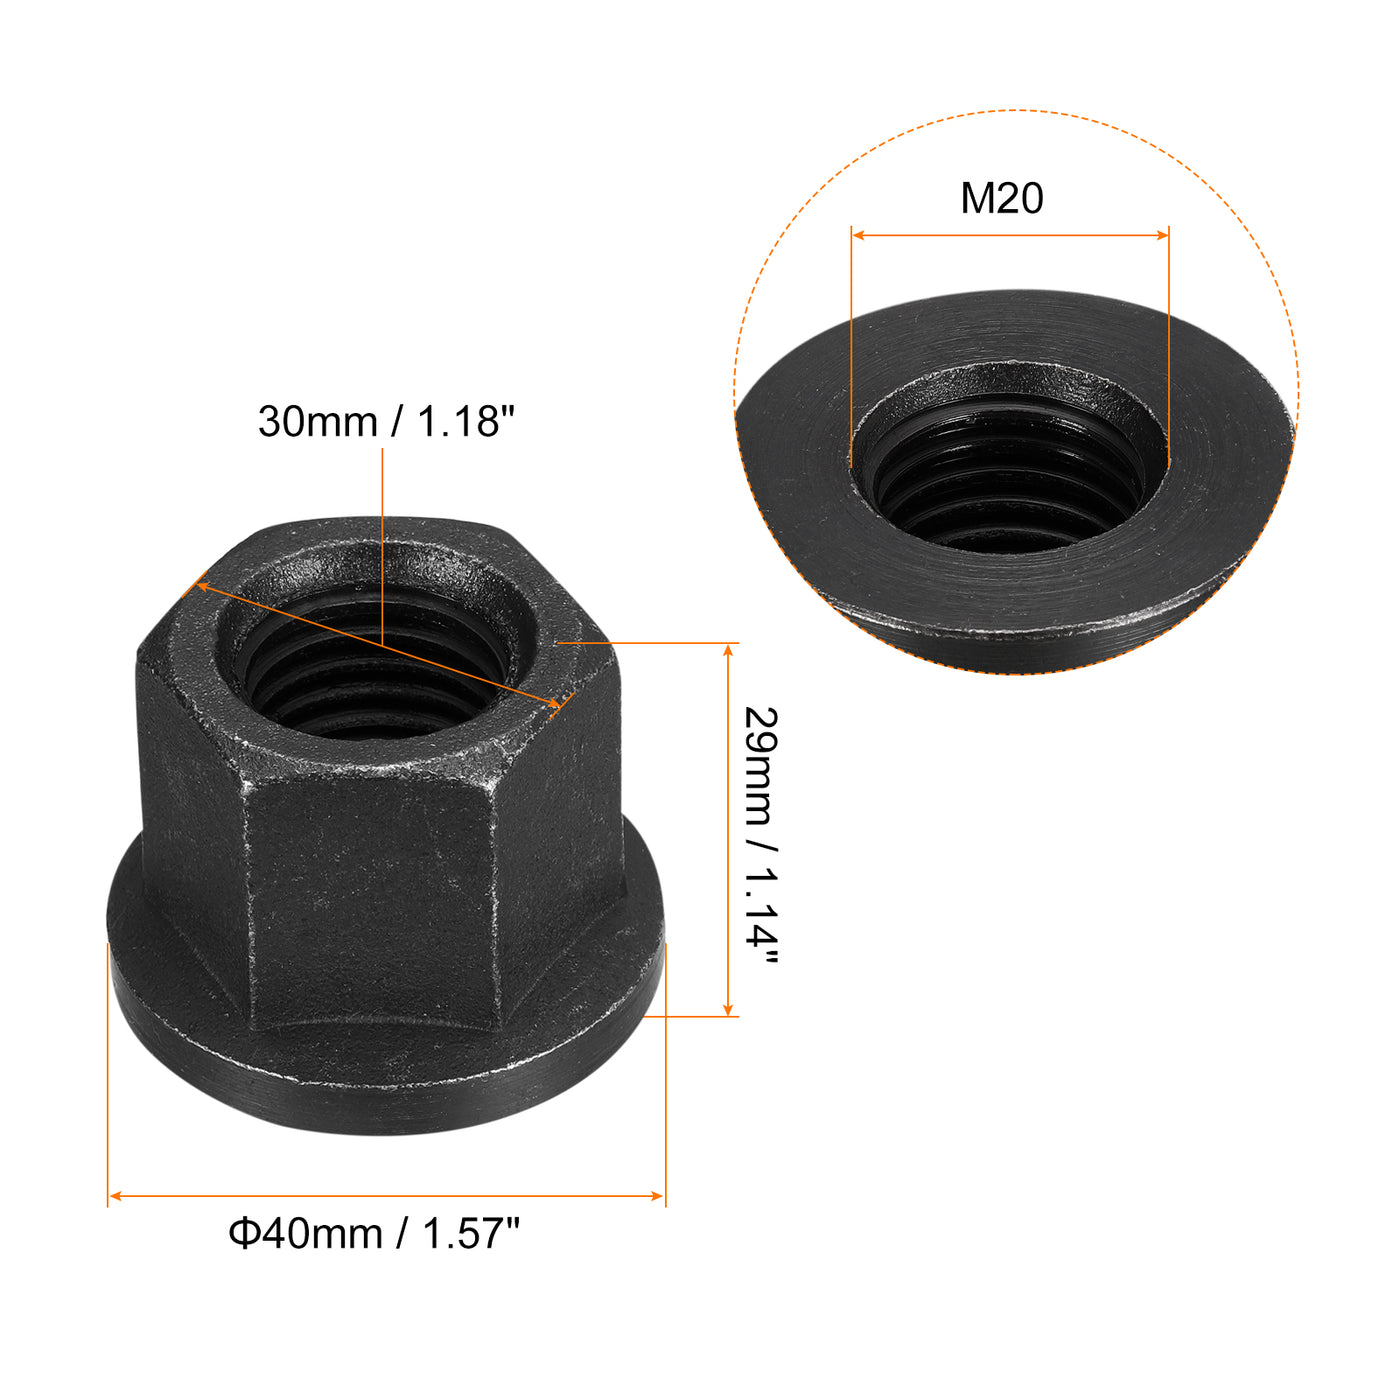 uxcell Uxcell M20 Flange Hex Lock Nuts, 2pcs Grade 8.8 Carbon Steel Hex Flange Nuts